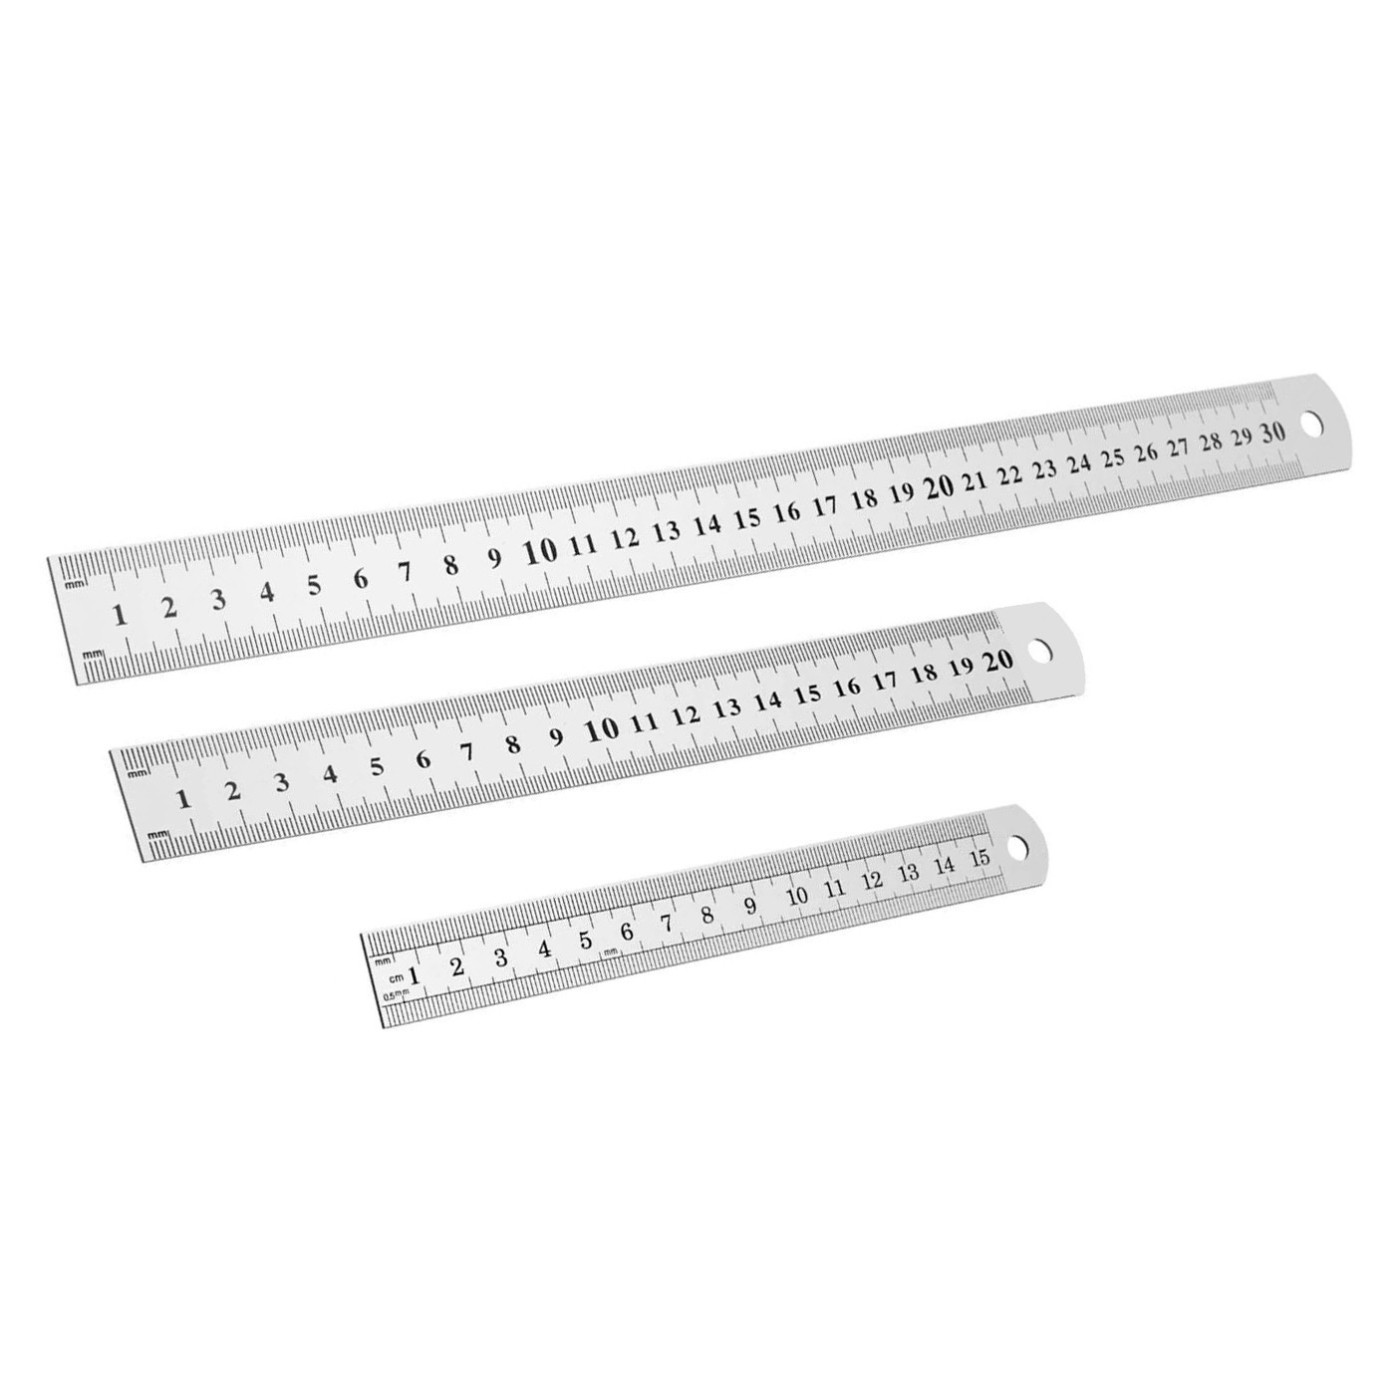 https://www.woodtoolsanddeco.com/11397-large_default/metal-ruler-15-cm-double-sided-cm-and-inches.jpg